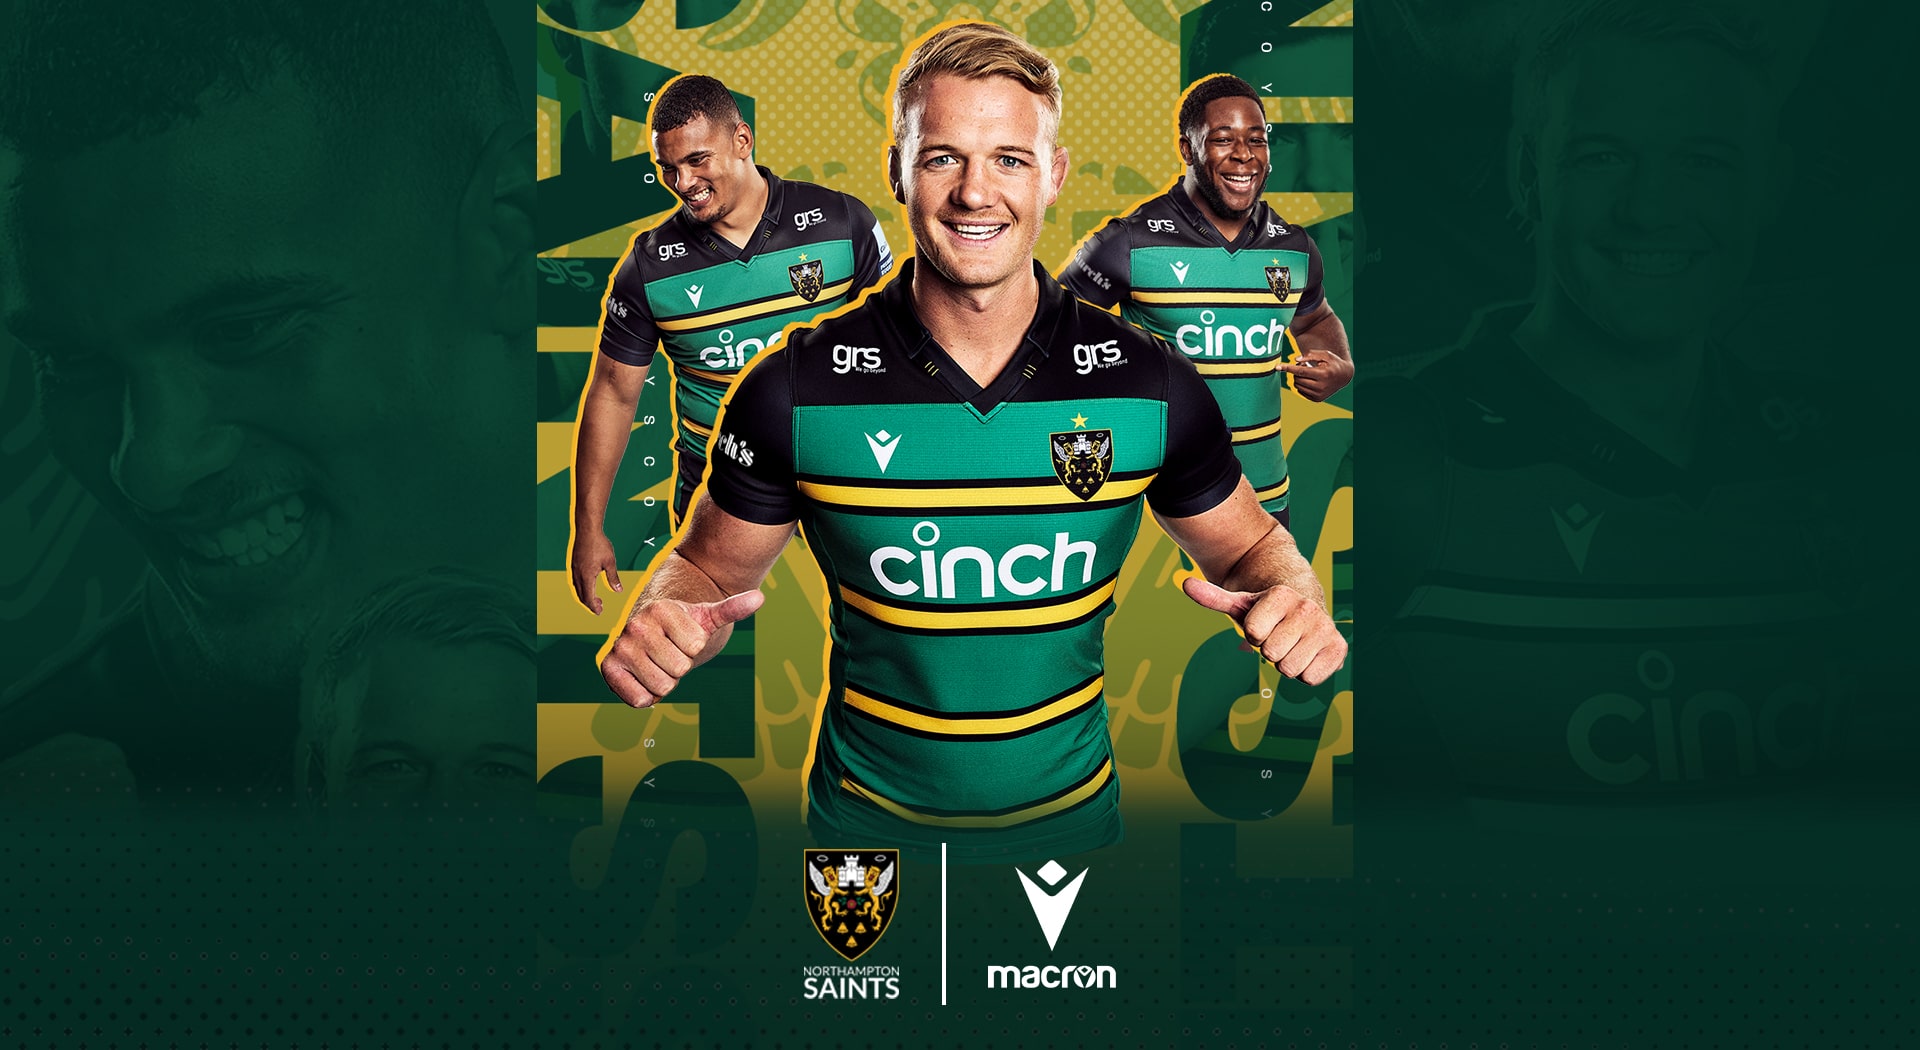 Macron Respect for tradition in the new “home” shirt of Northampton Saints  | Image 1